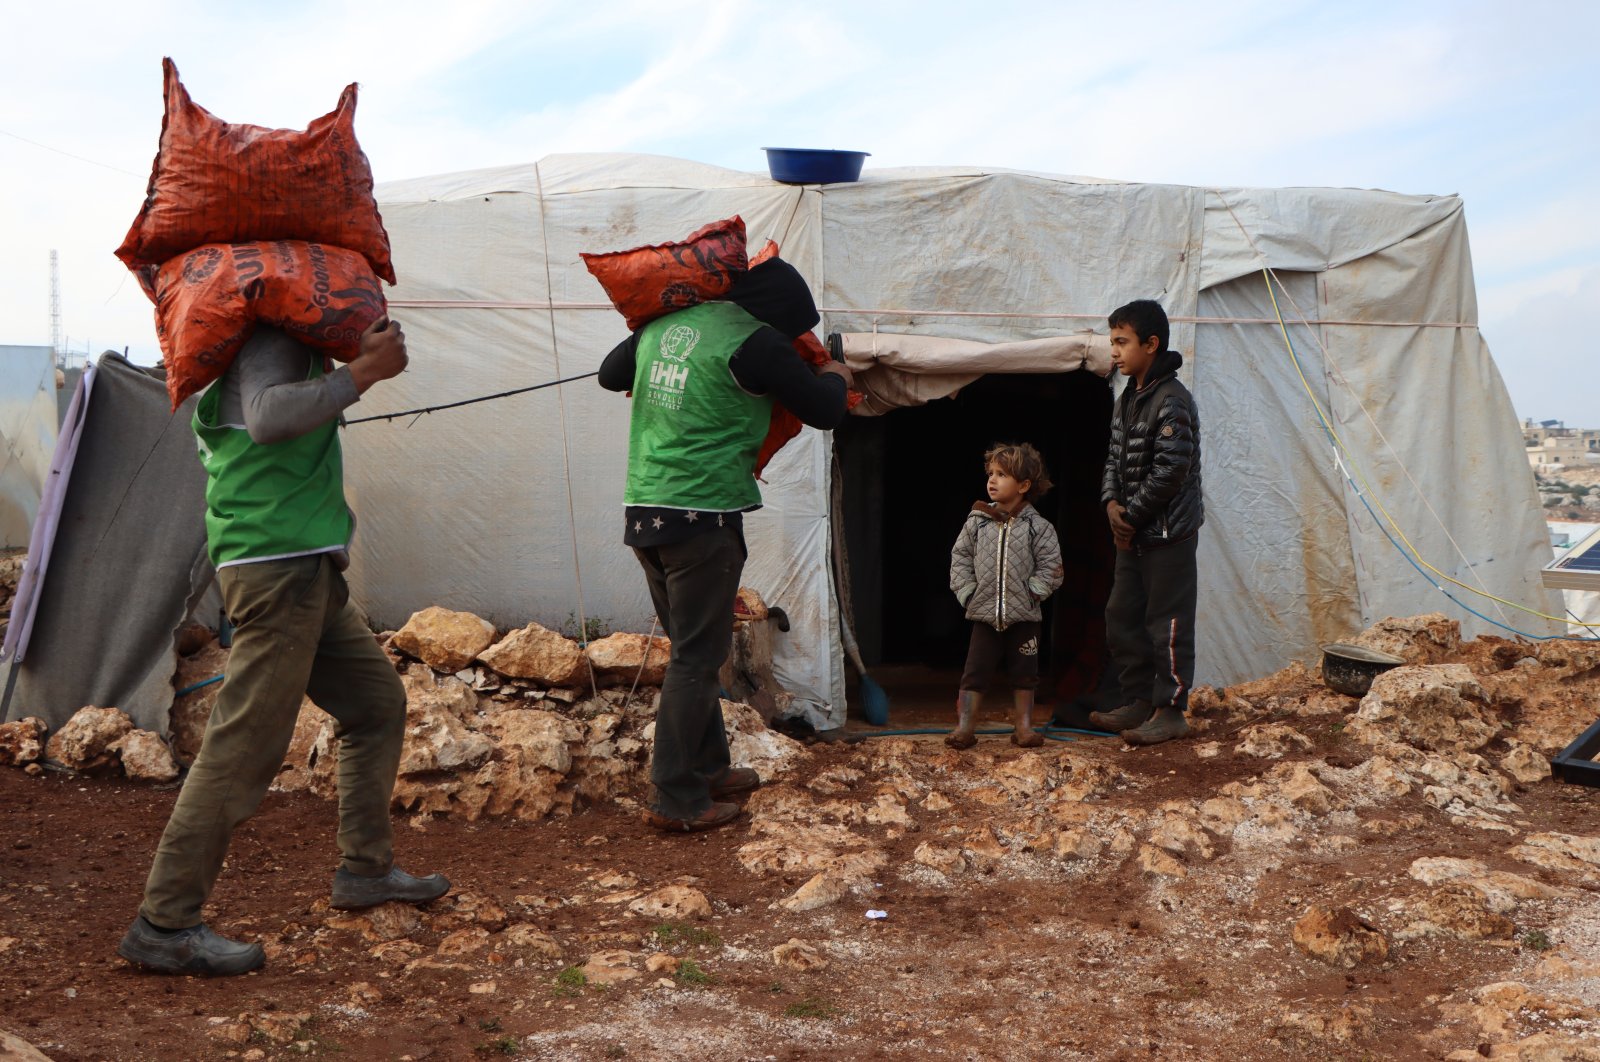 IHH volunteers carry aid to the needy in Syria in this photo released on Wednesday, Jan. 5, 2022. (AA Photo)